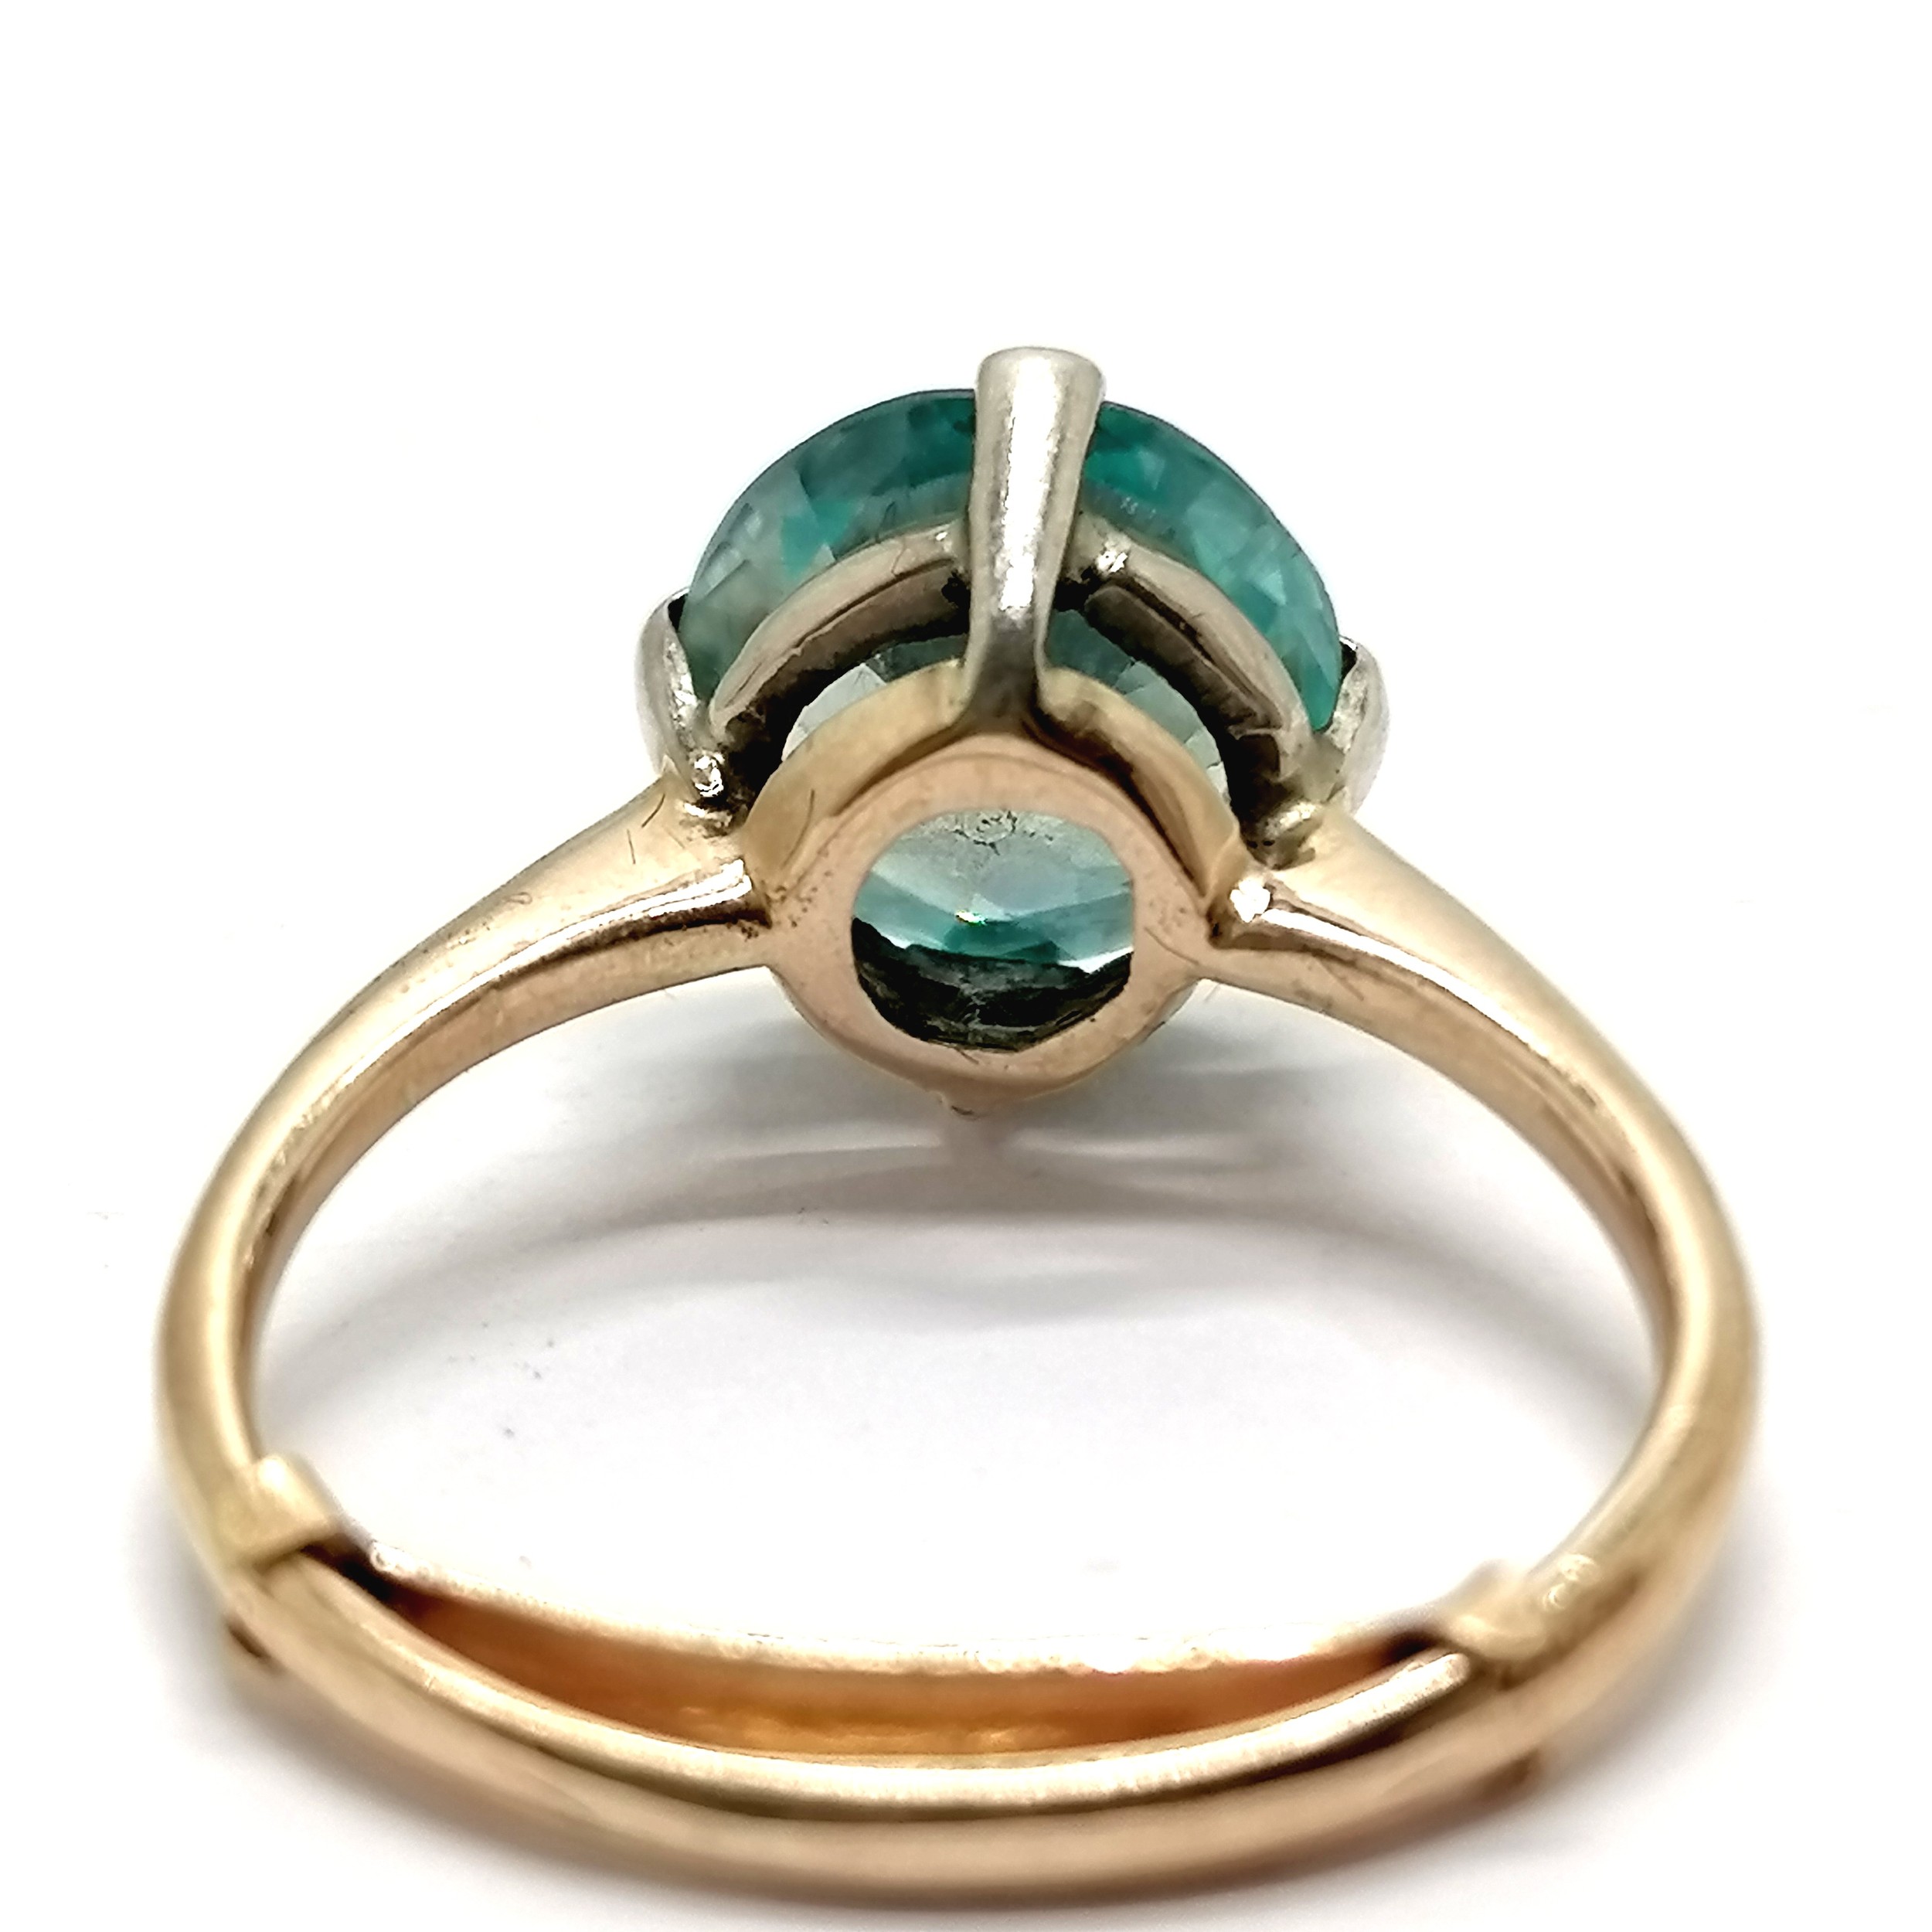 Antique unmarked gold blue topaz solitaire ring - size M½ (with keeper) & 2.9g total weight - Image 2 of 3